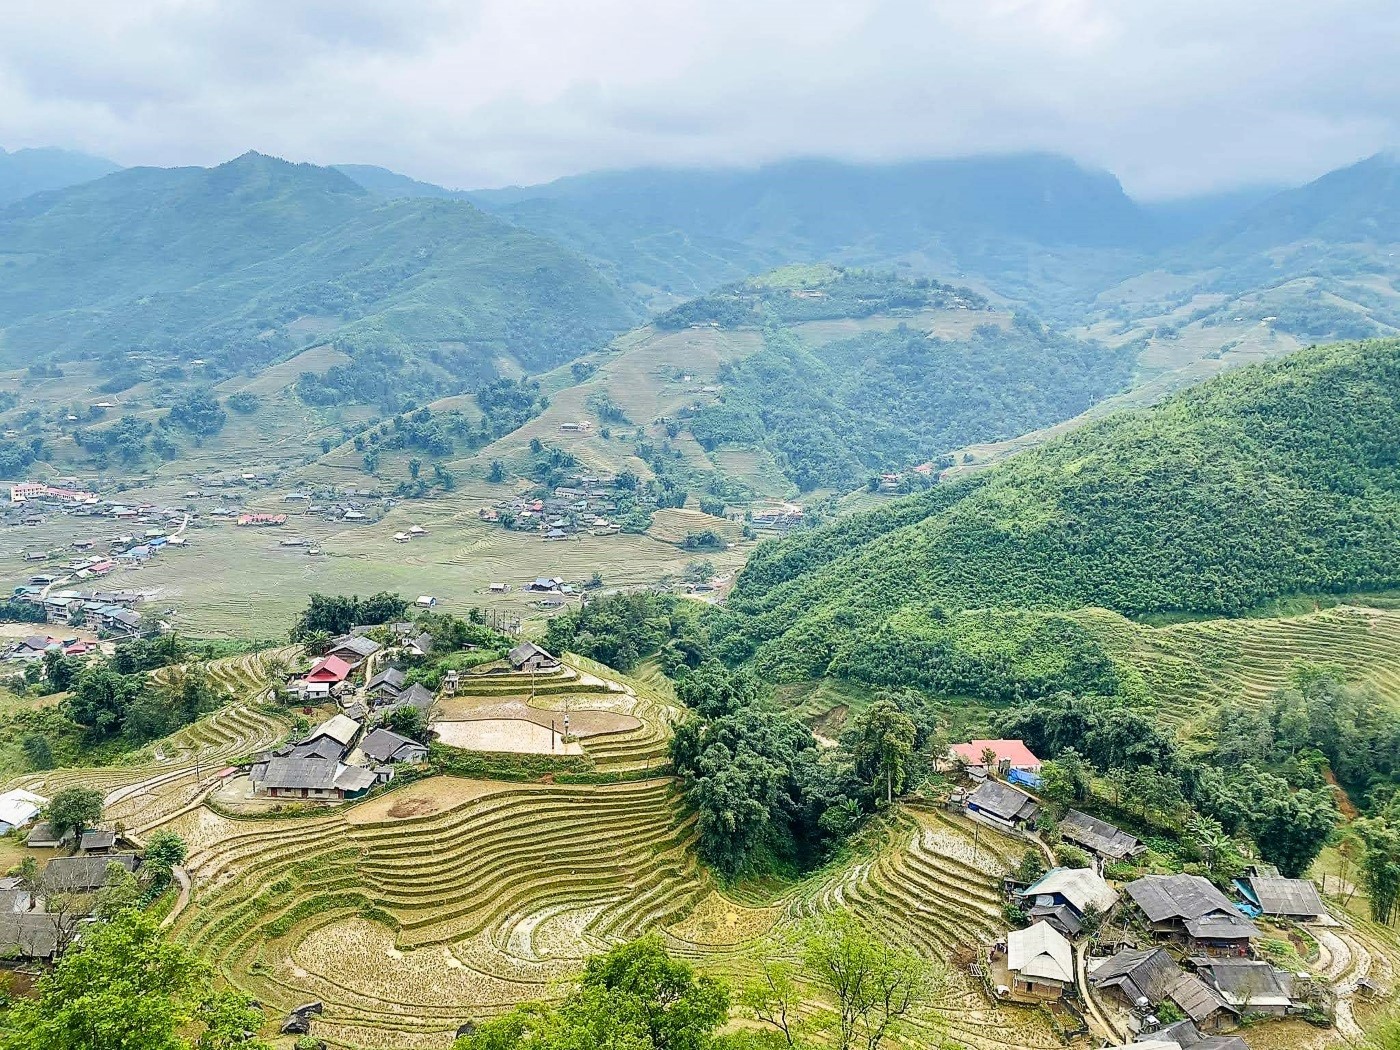 View of the rice paddies in Sapa